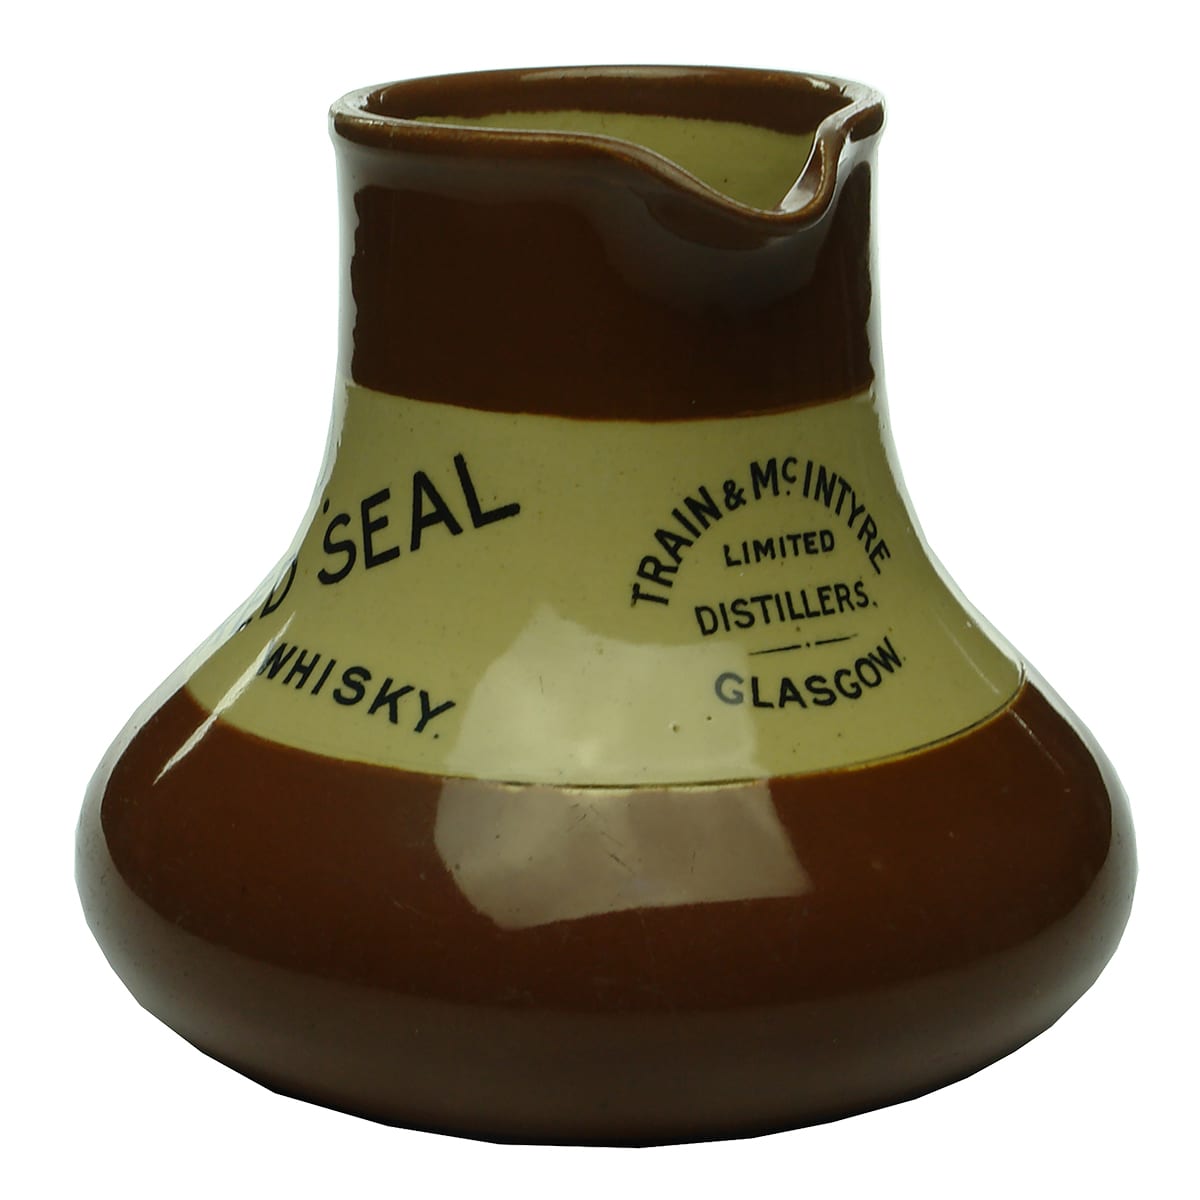 Whisky Water Jug. Train & McIntyre Red Seal Whisky Glasgow.